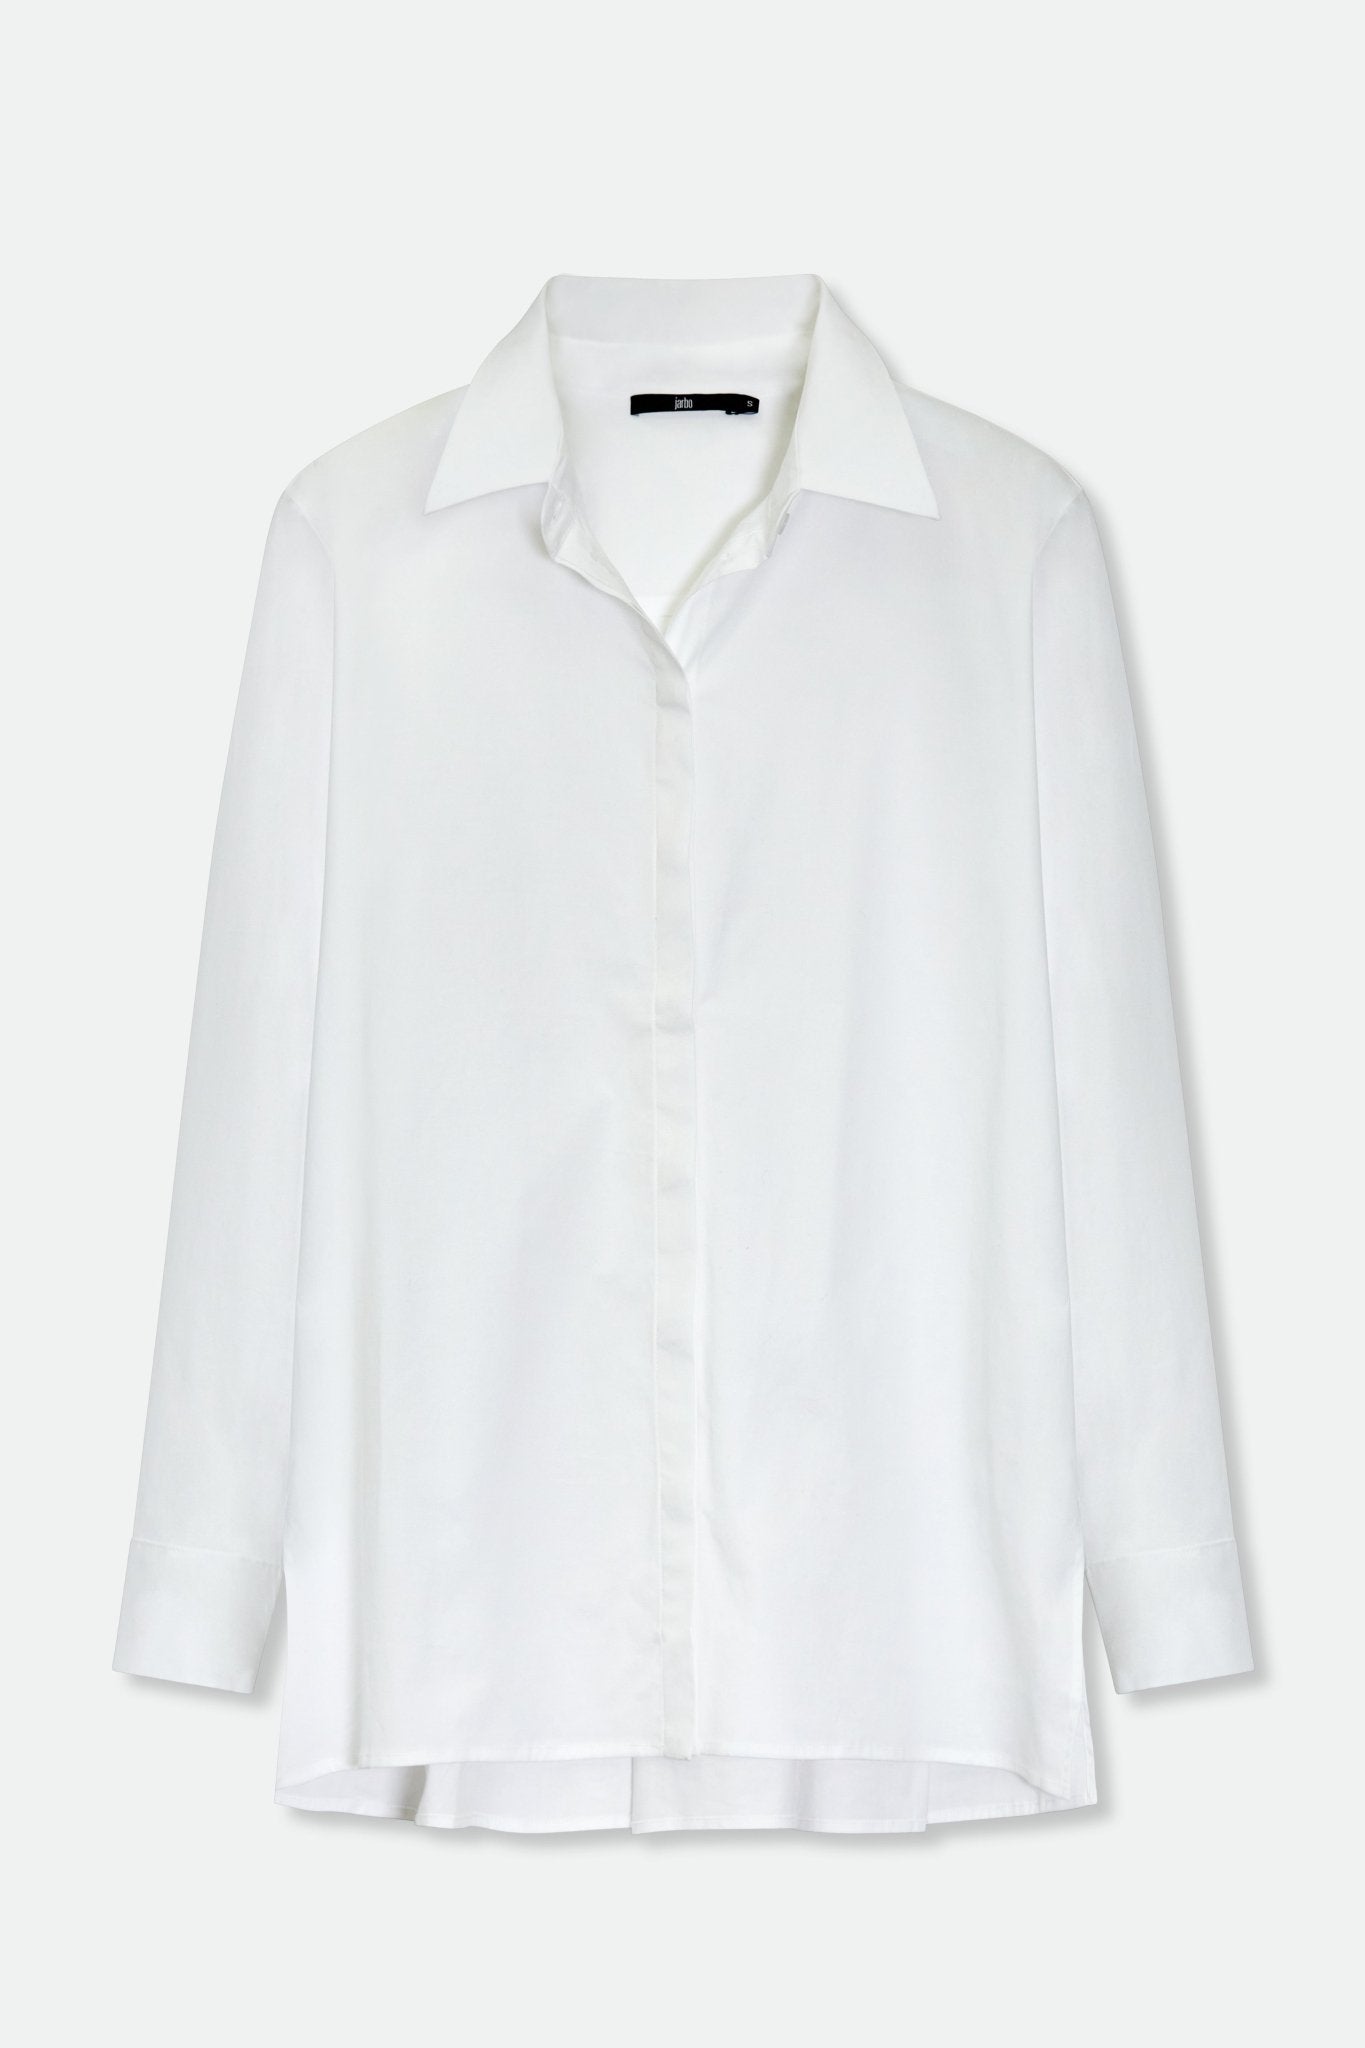 SCOUT PLEAT BACK SHIRT IN ITALIAN COTTON STRETCH - Jarbo